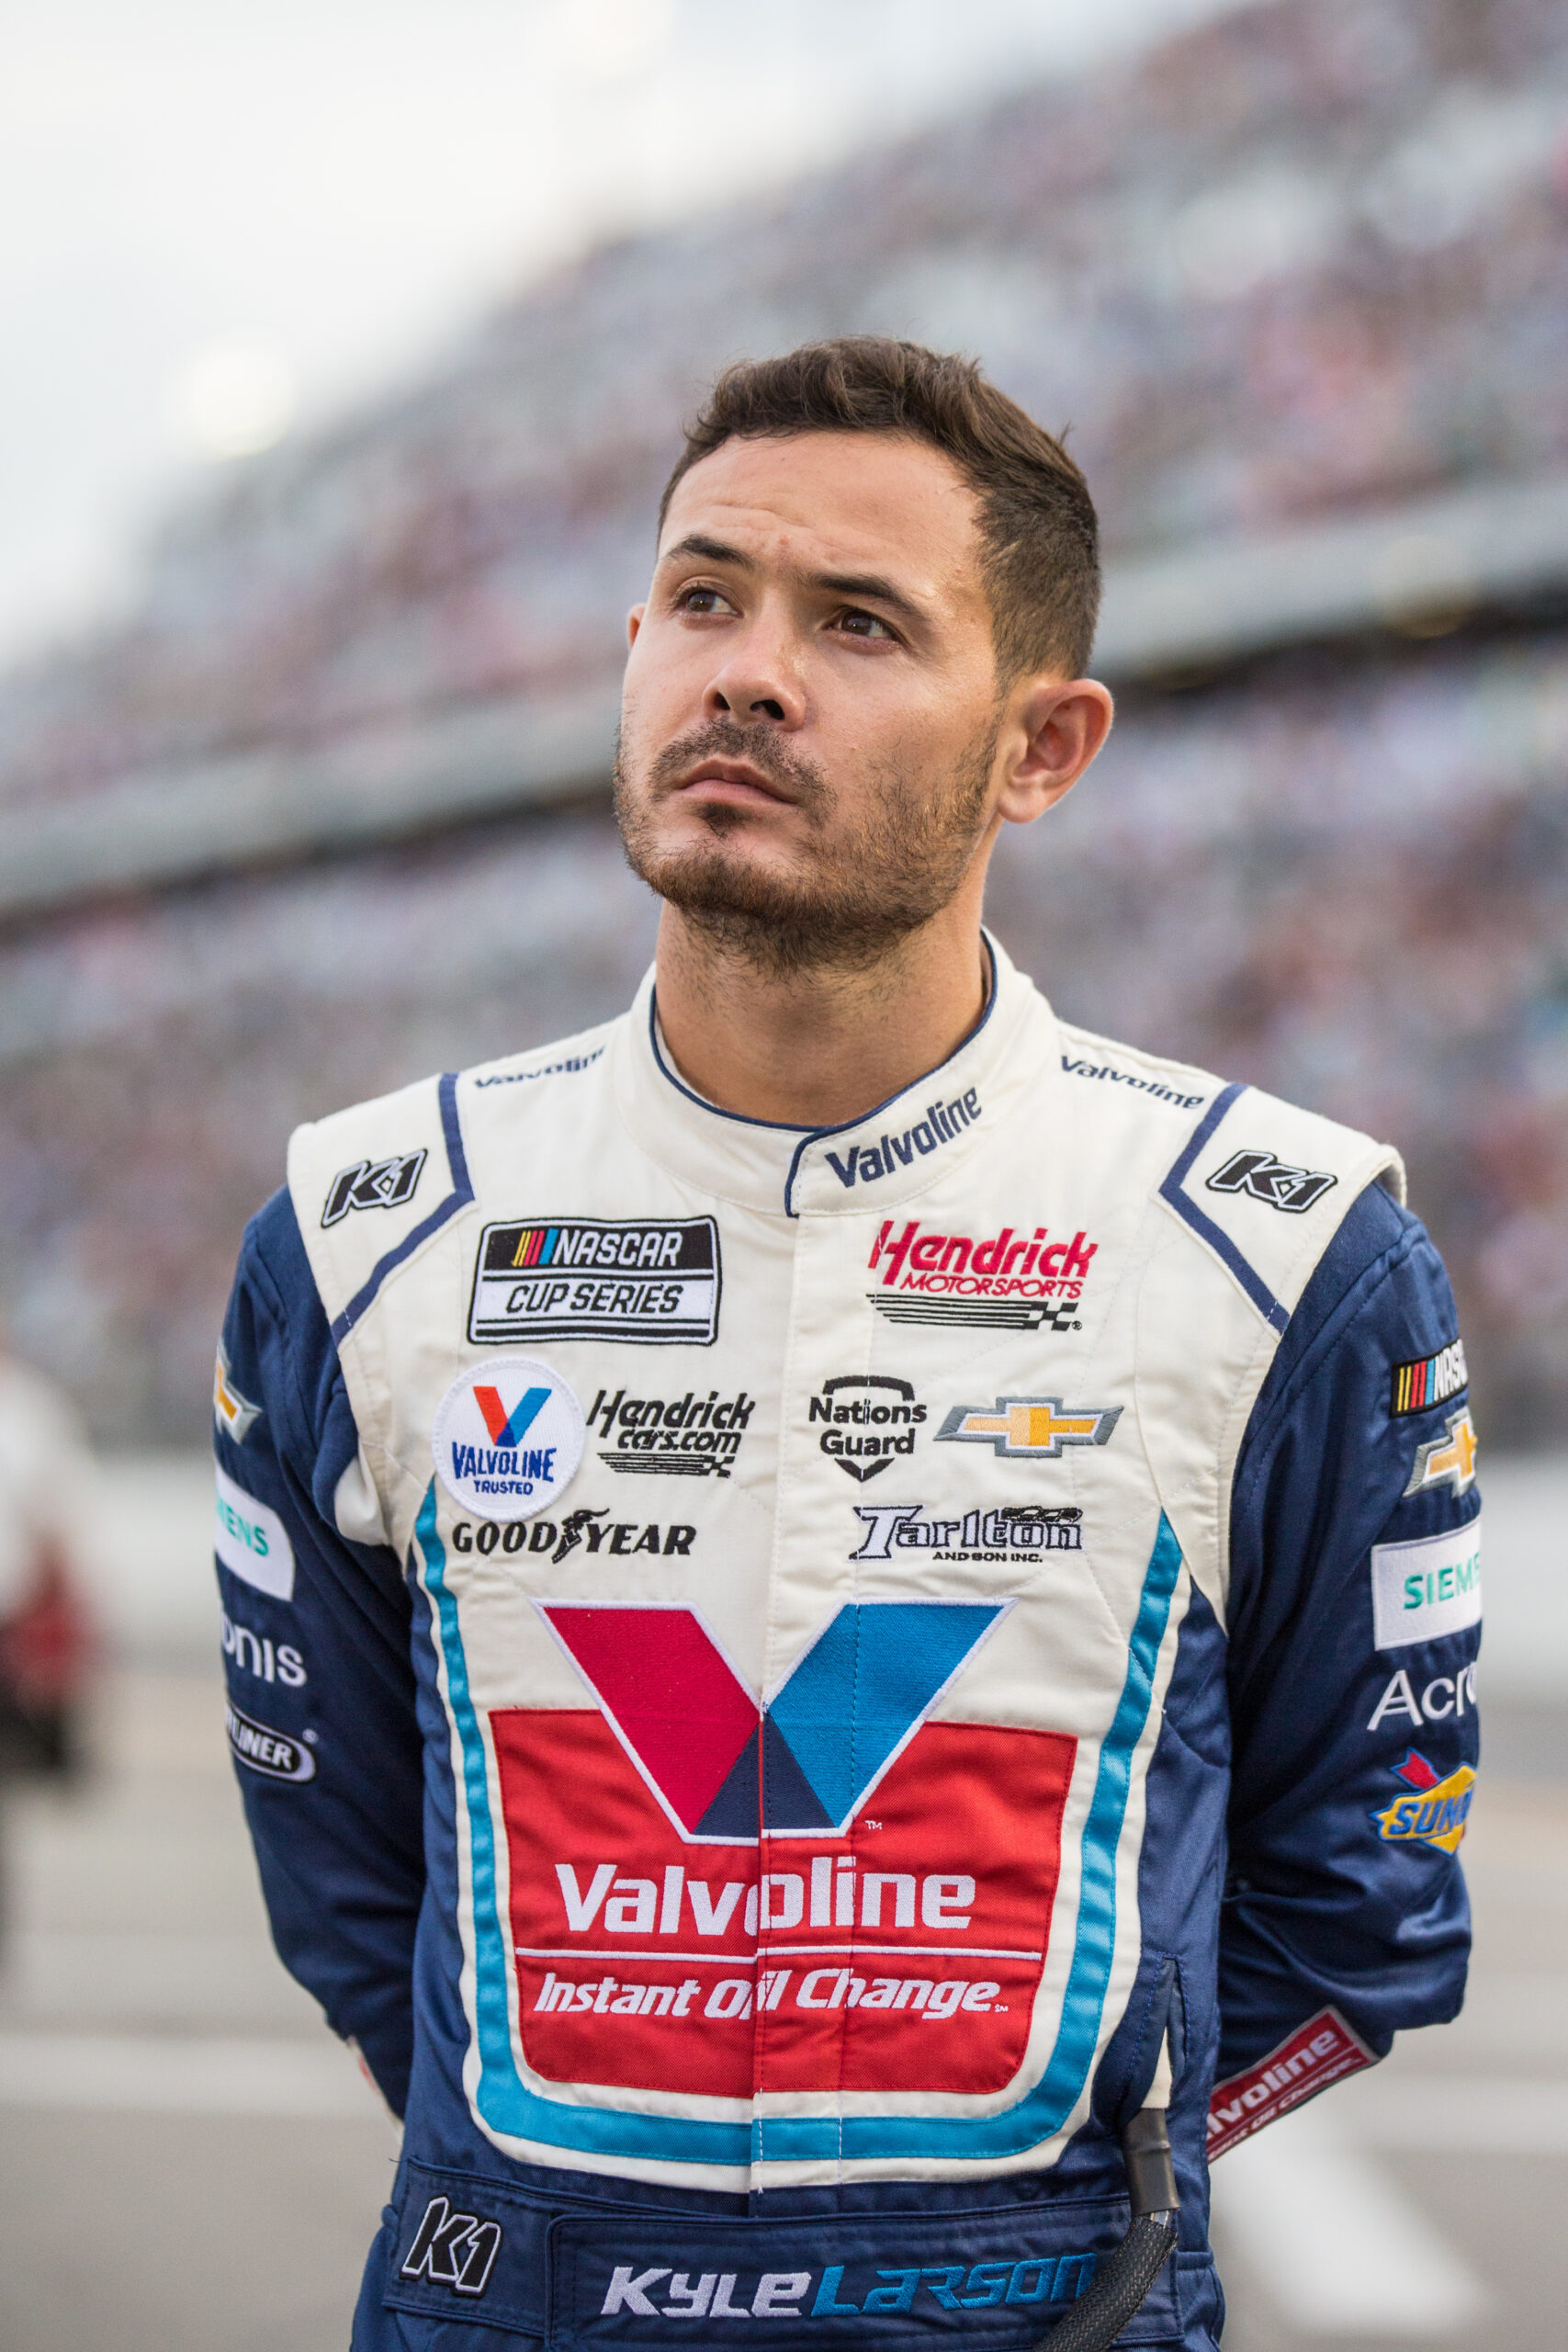 The versatile Kyle Larson chases his first NASCAR Cup Series championship. (Photo: Jonathan Huff | The Podium Finish)